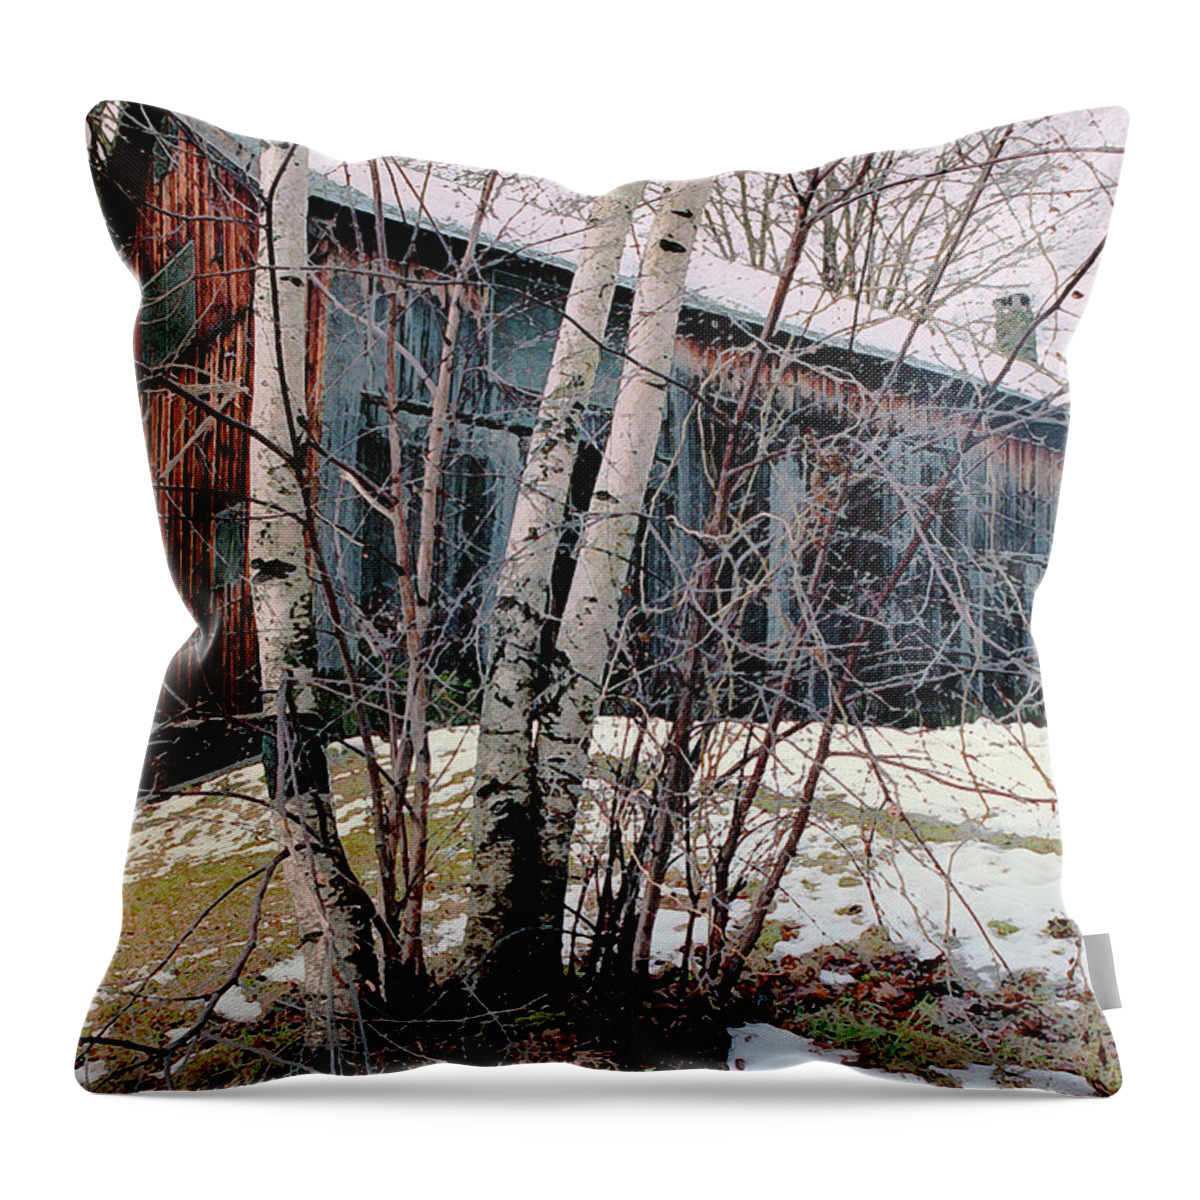 Nyoda Girls Camp Throw Pillow featuring the digital art Birch Trees with Antique Barn, Winter Dusk at Camp Nyoda 1988 by Kathy Anselmo